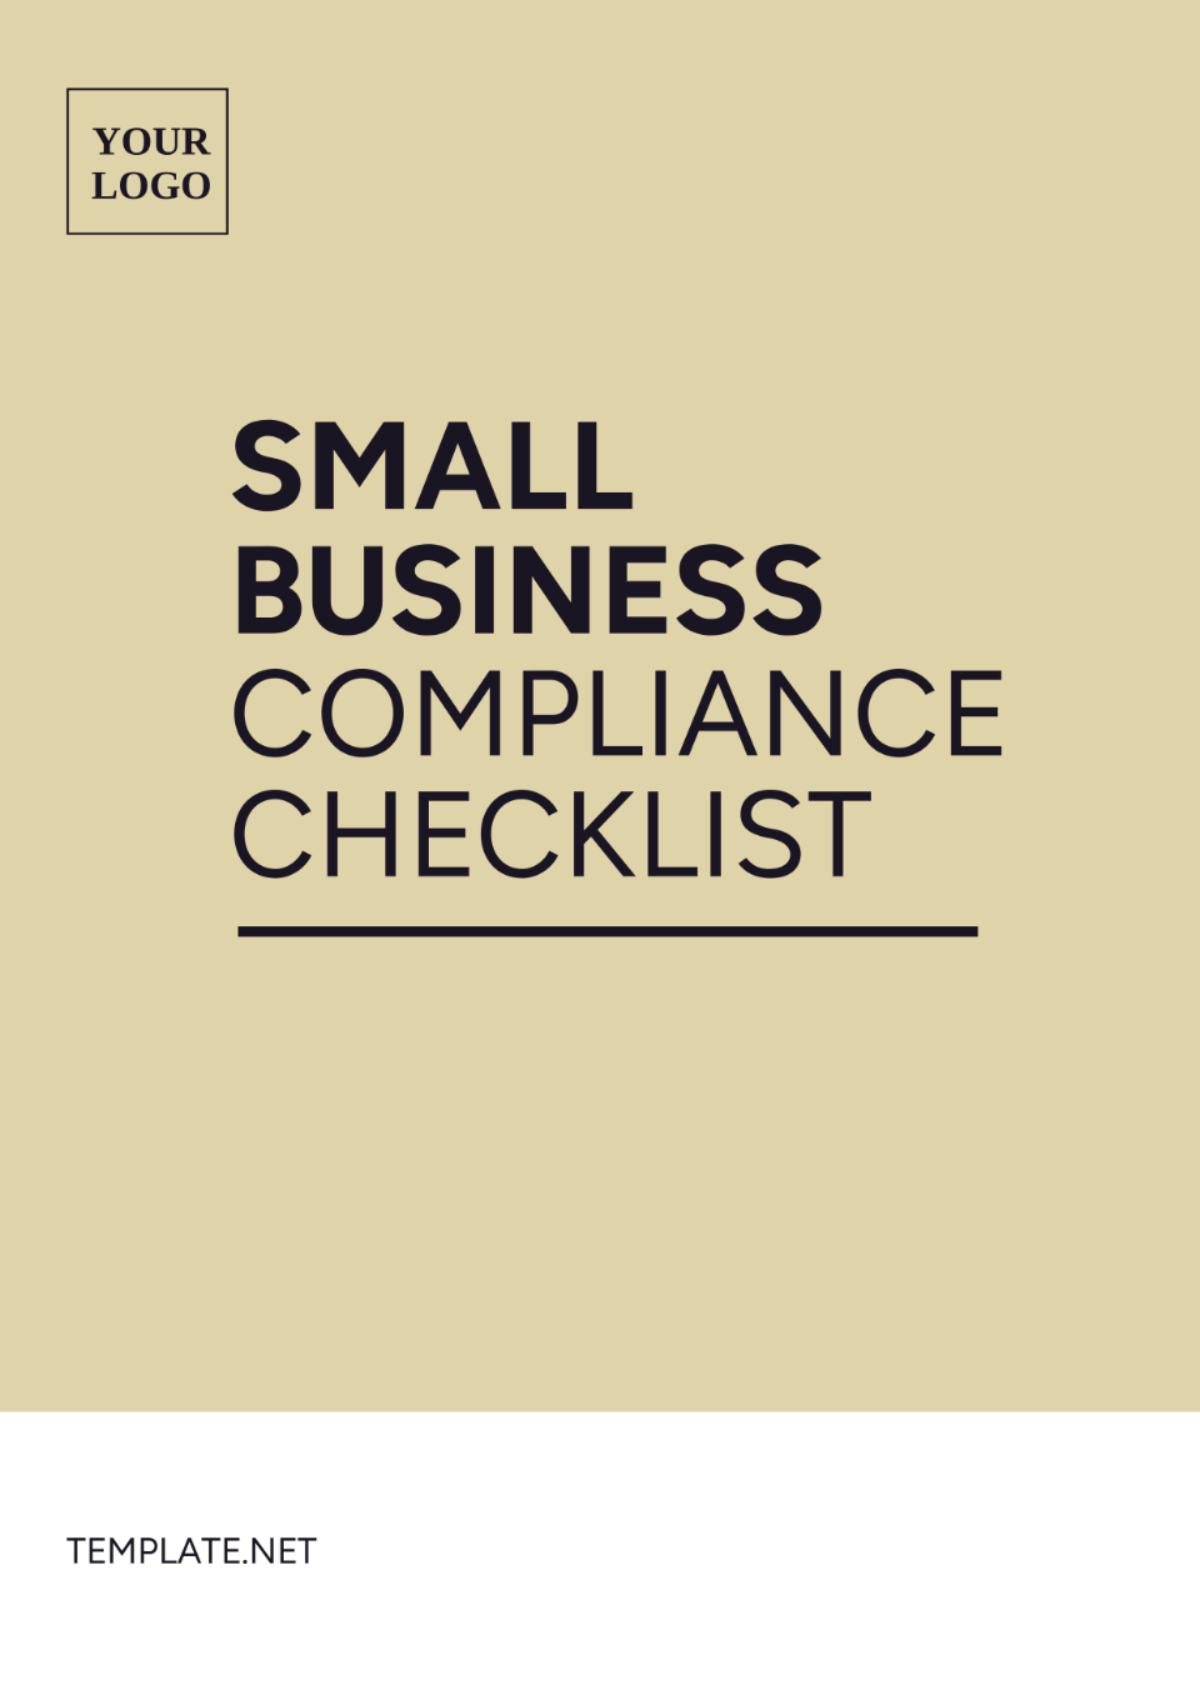 Small Business Compliance Checklist Template